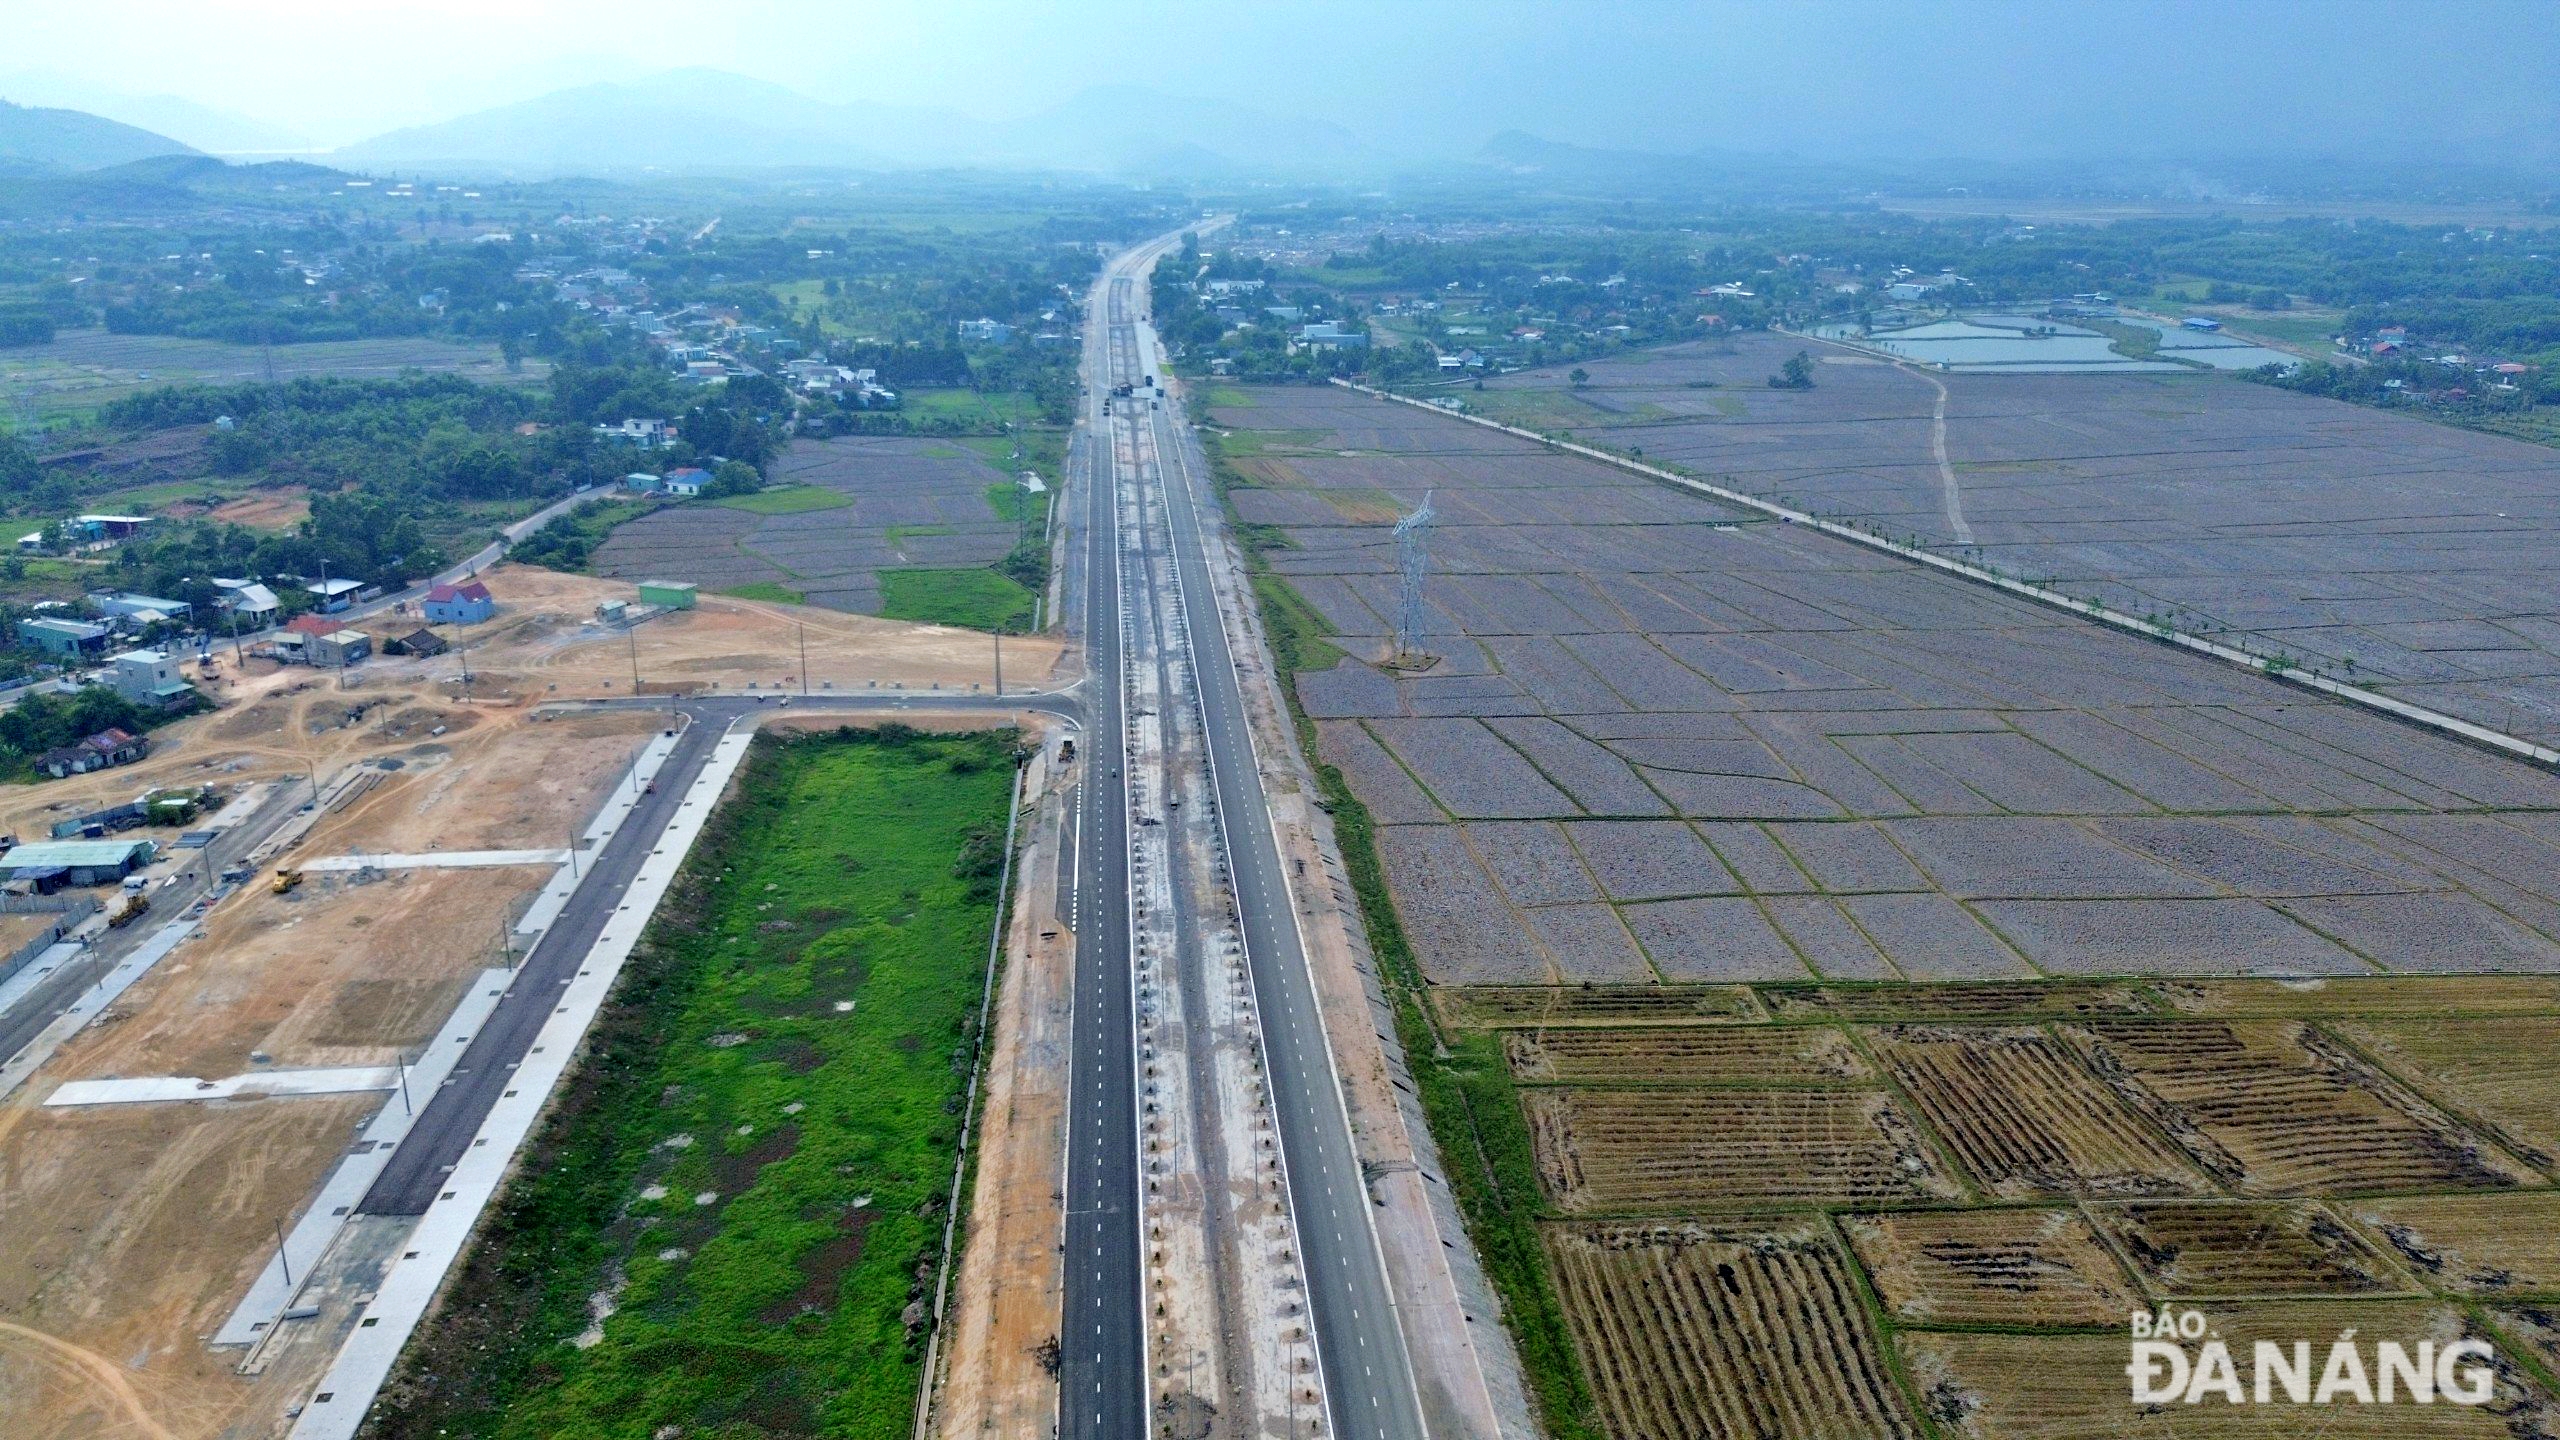 The first phase of the Western Ring Road project has a total investment of nearly VND1,500 billion. A 19km-long road connecting National Highway 14B to Ho Chi Minh Road passes through communes of Hoa Khuong, Hoa Ninh, Hoa Phu, Hoa Phong and Hoa Lien of Hoa Vang District.